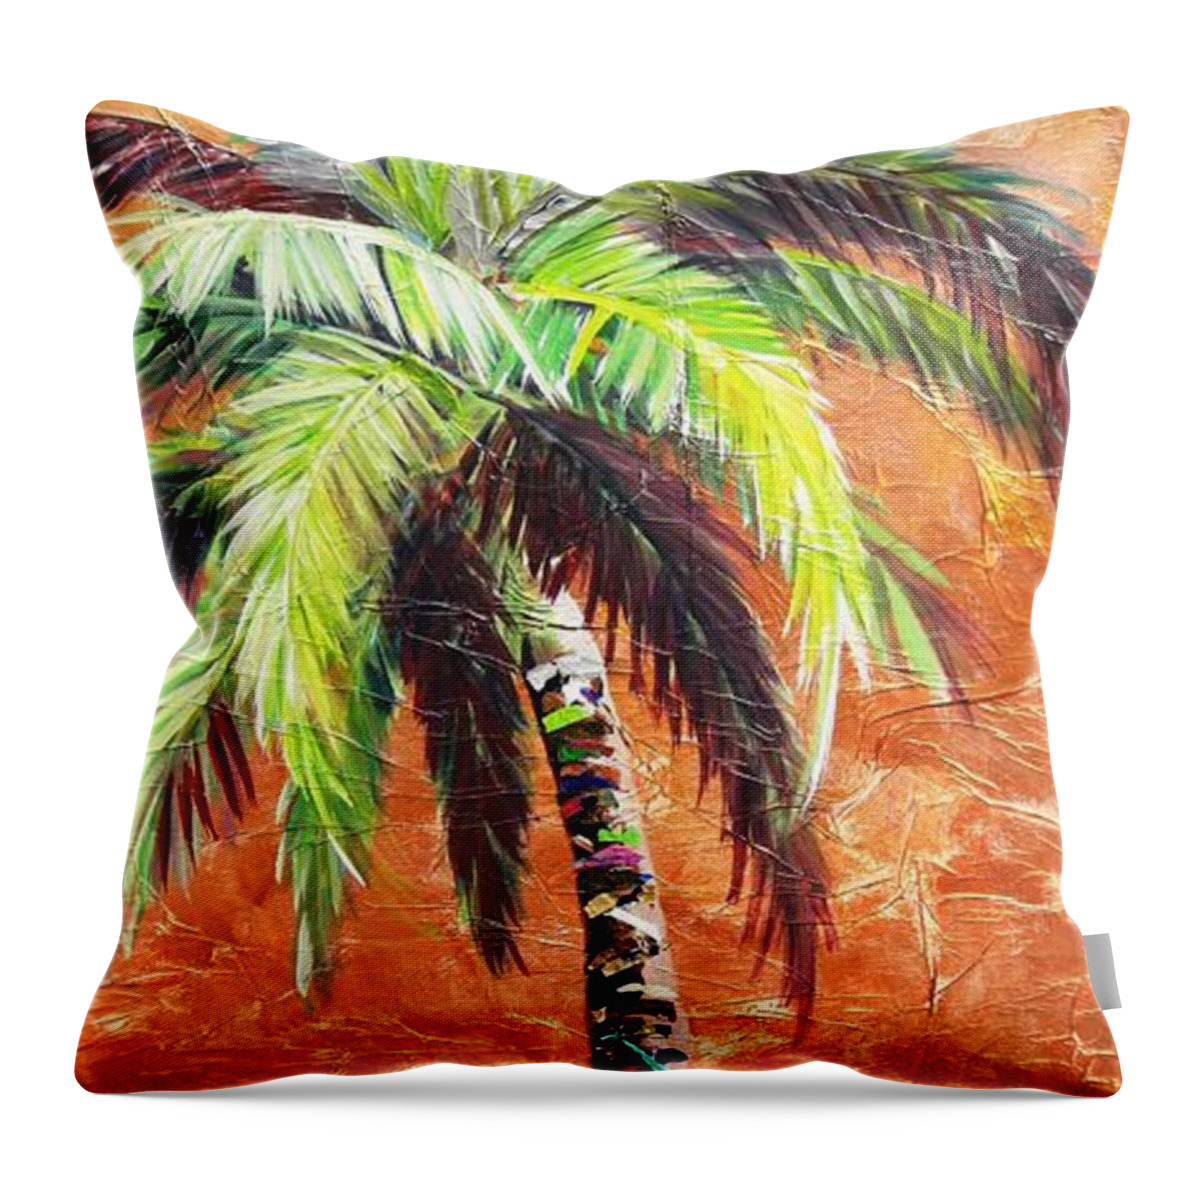 Copper Throw Pillow featuring the painting Penny Palm by Kristen Abrahamson